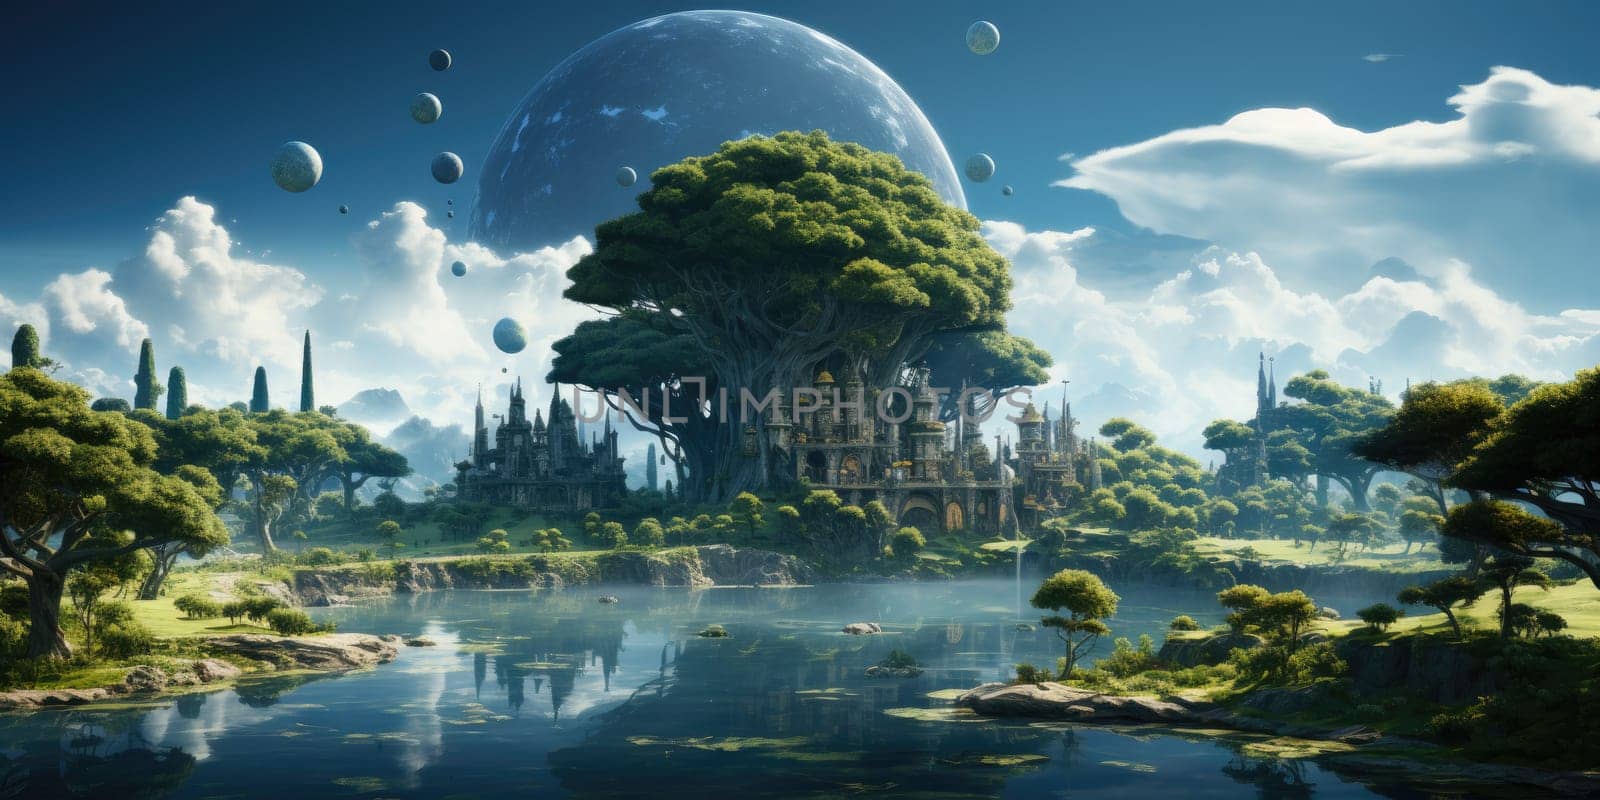 A surreal dreamscape of a floating island that defies gravity. Floating in the endless sky It invites you to explore your imagination. Dreamlike abstract concept by Generative AI by wichayada